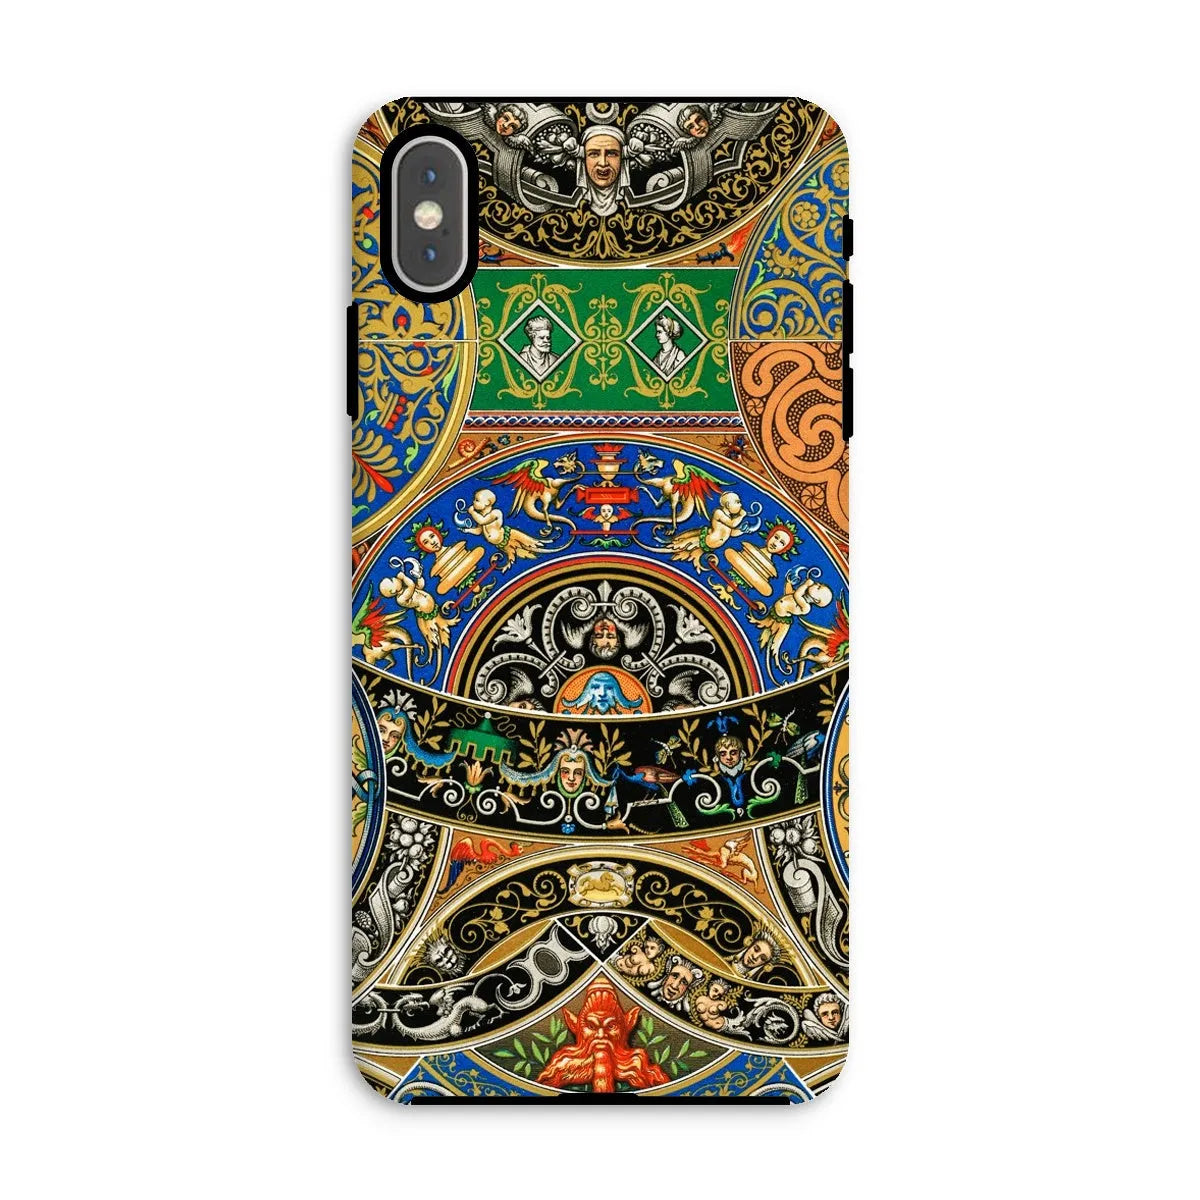 Renaissance Pattern 2 By Auguste Racinet Tough Phone Case - Iphone Xs Max / Gloss - Mobile Phone Cases - Aesthetic Art